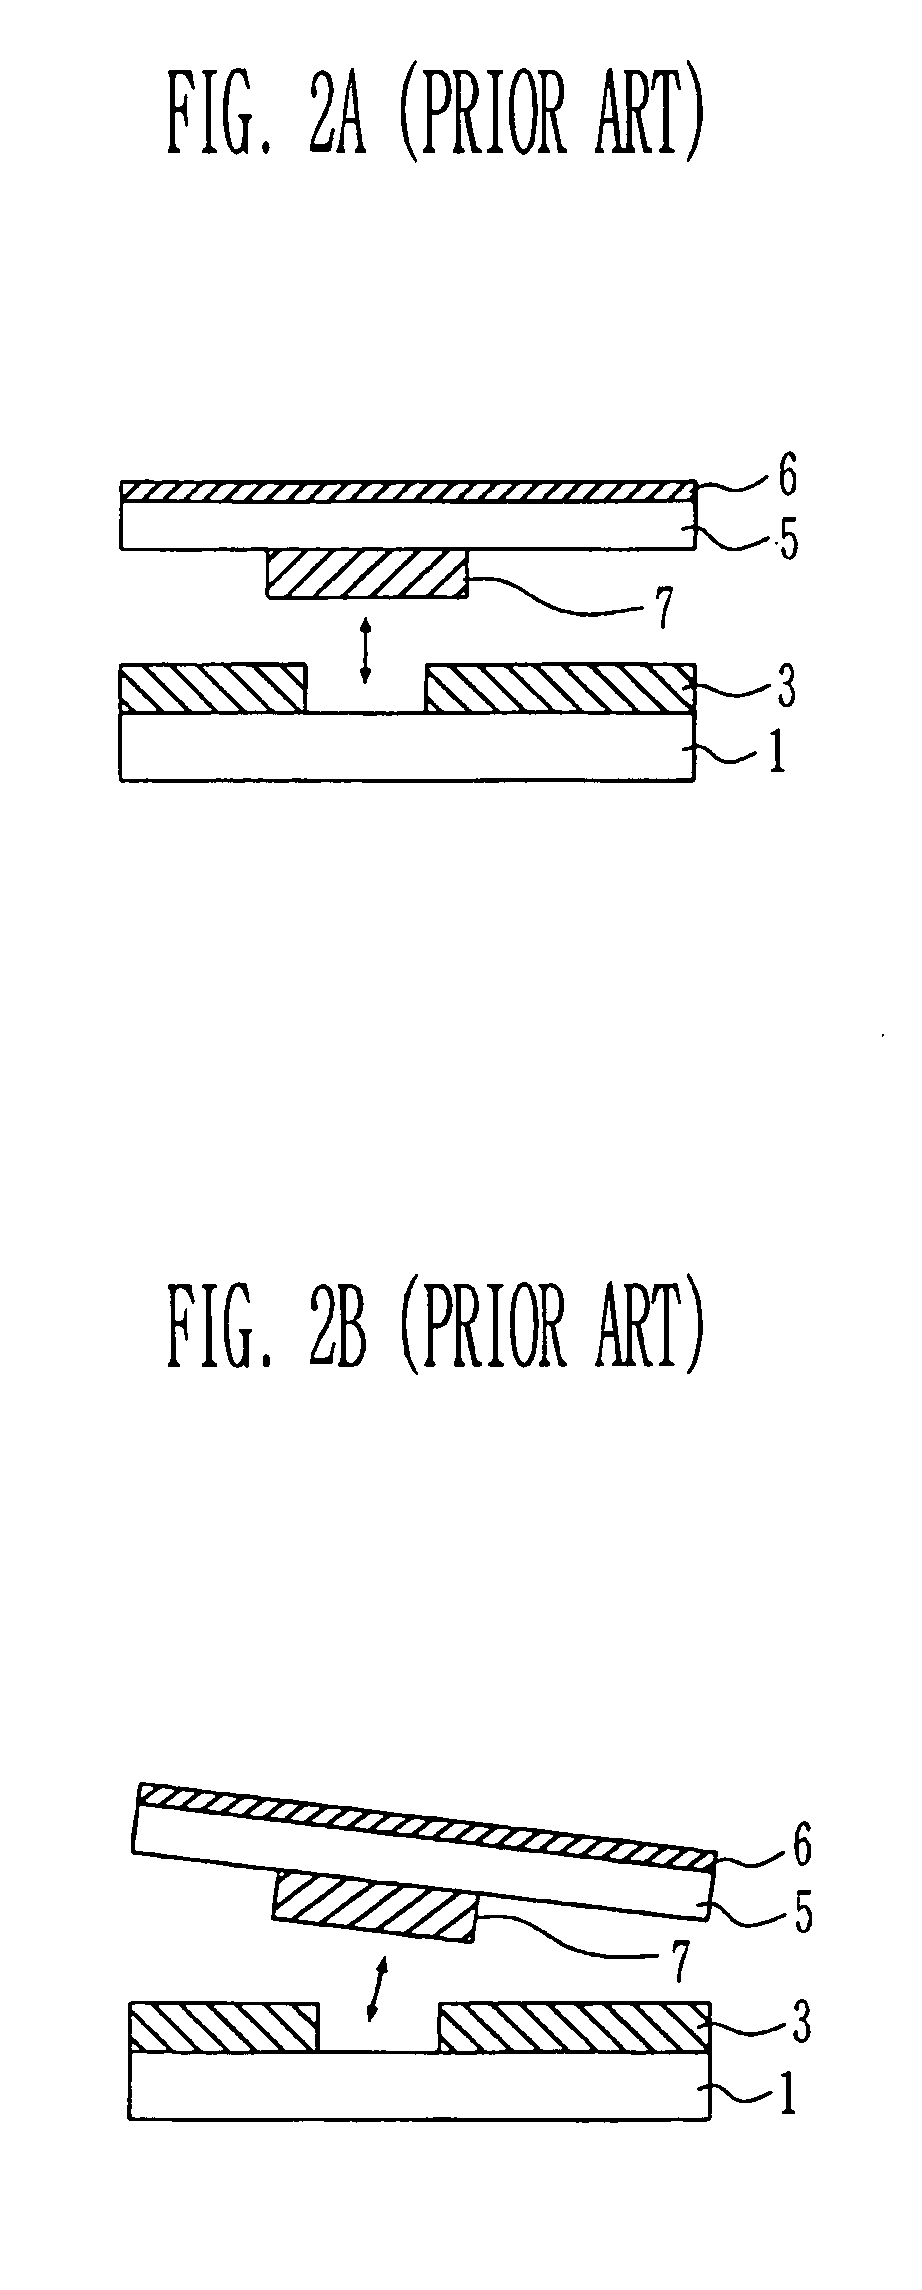 Self-sustaining center-anchor microelectromechanical switch and method of manufacturing the same